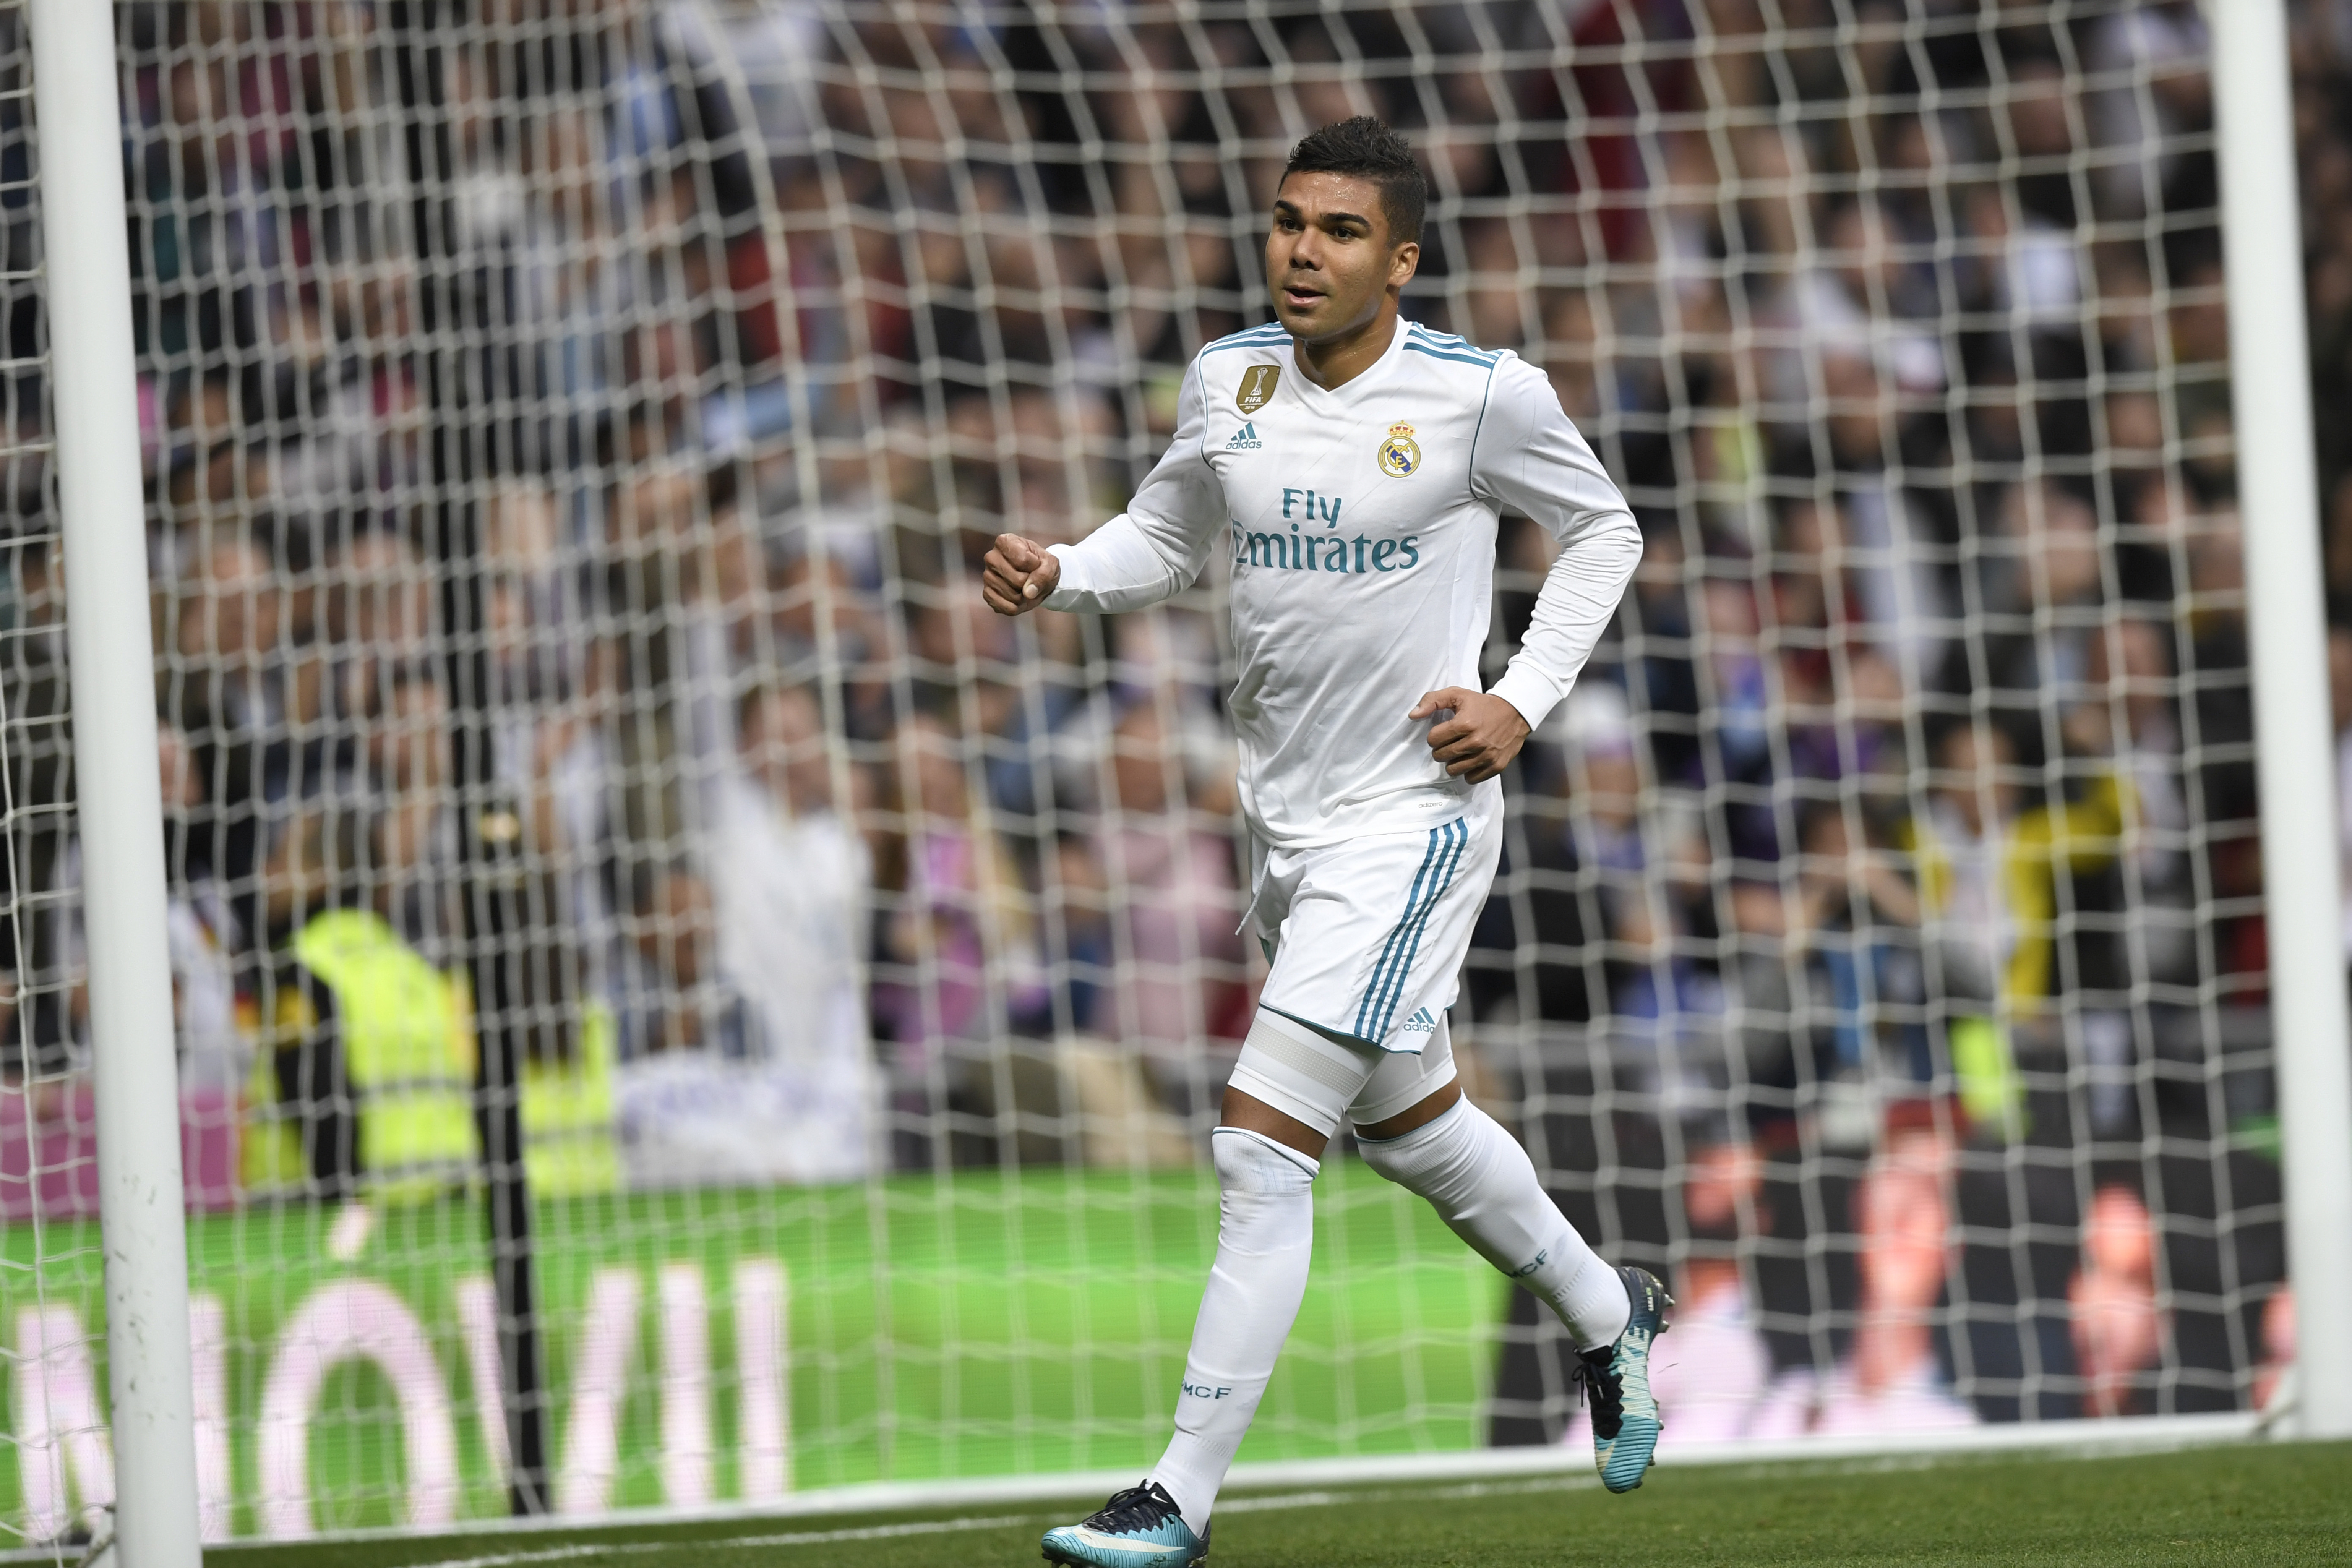 Real Madrid's Brazilian midfielder Casemiro celebrates after scoring during the Spanish league football match Real Madrid CF against Malaga CF on 25, November 2017 at the Santiago Bernabeu stadium in Madrid. / AFP PHOTO / GABRIEL BOUYS        (Photo credit should read GABRIEL BOUYS/AFP/Getty Images)